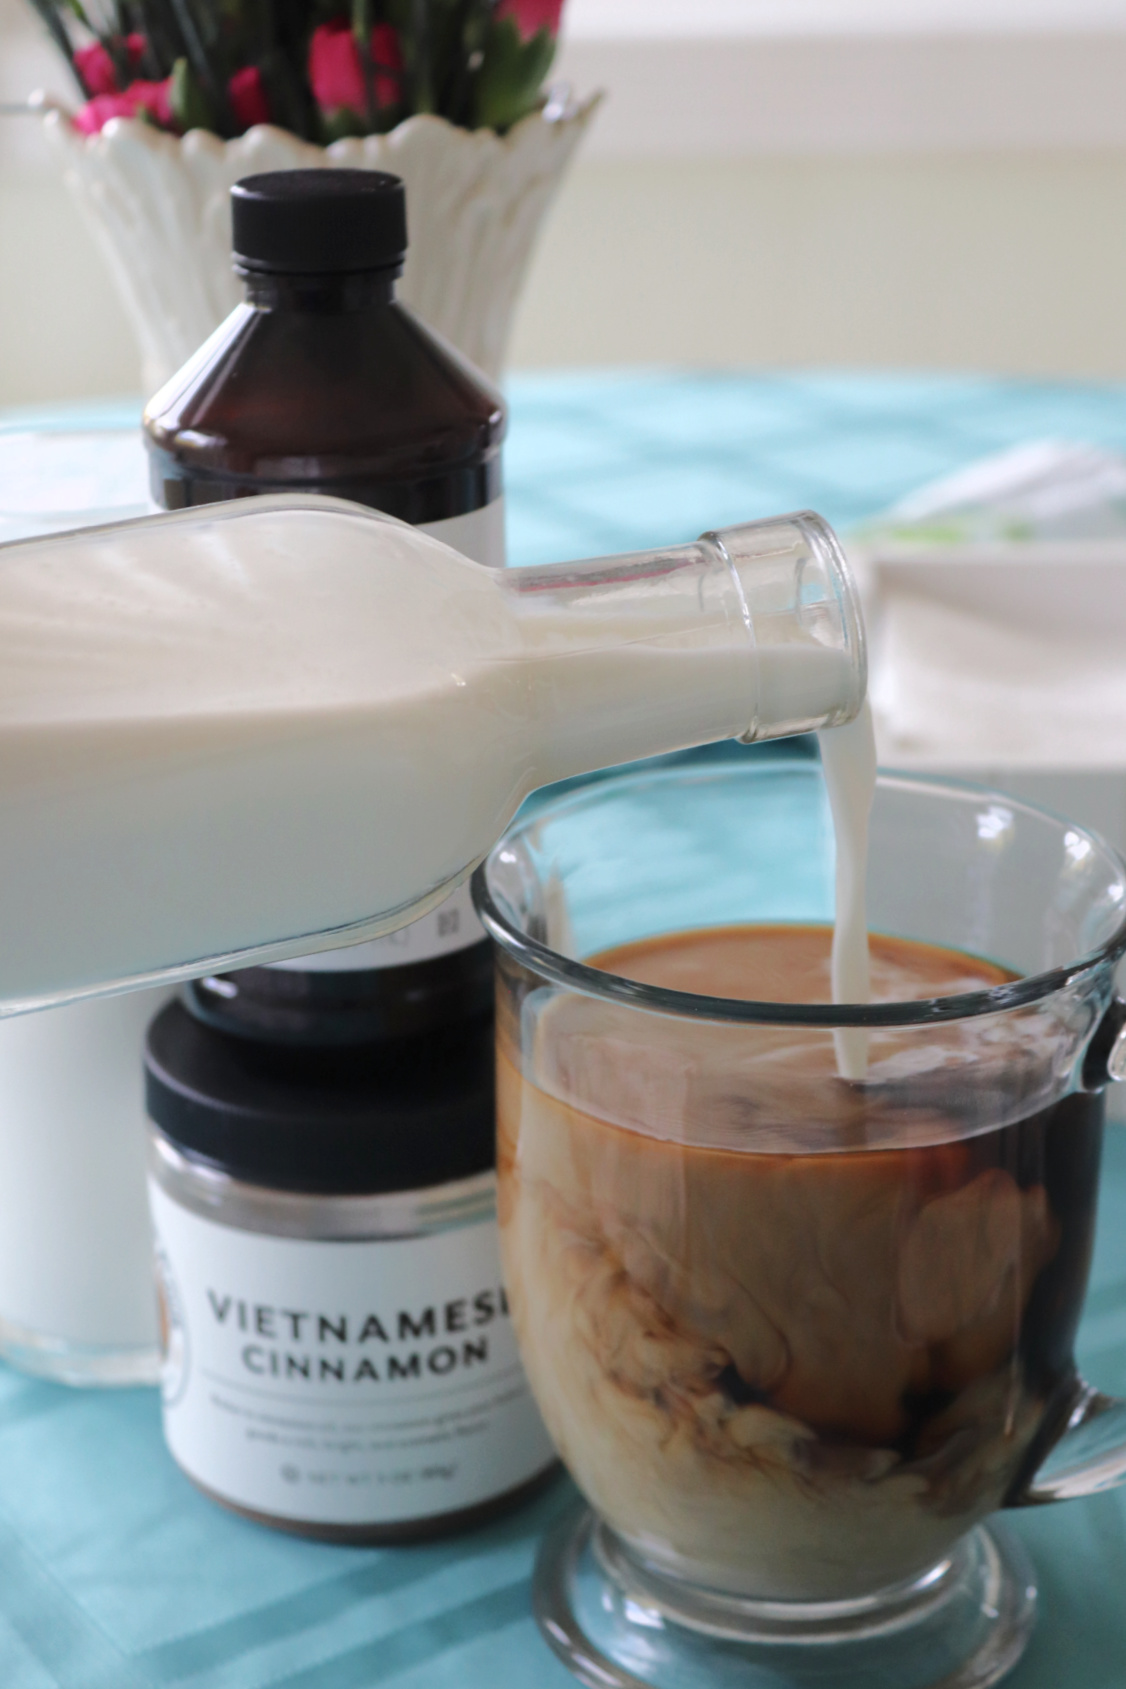 Creamer being poured into a cup of coffee from a glass bottle.